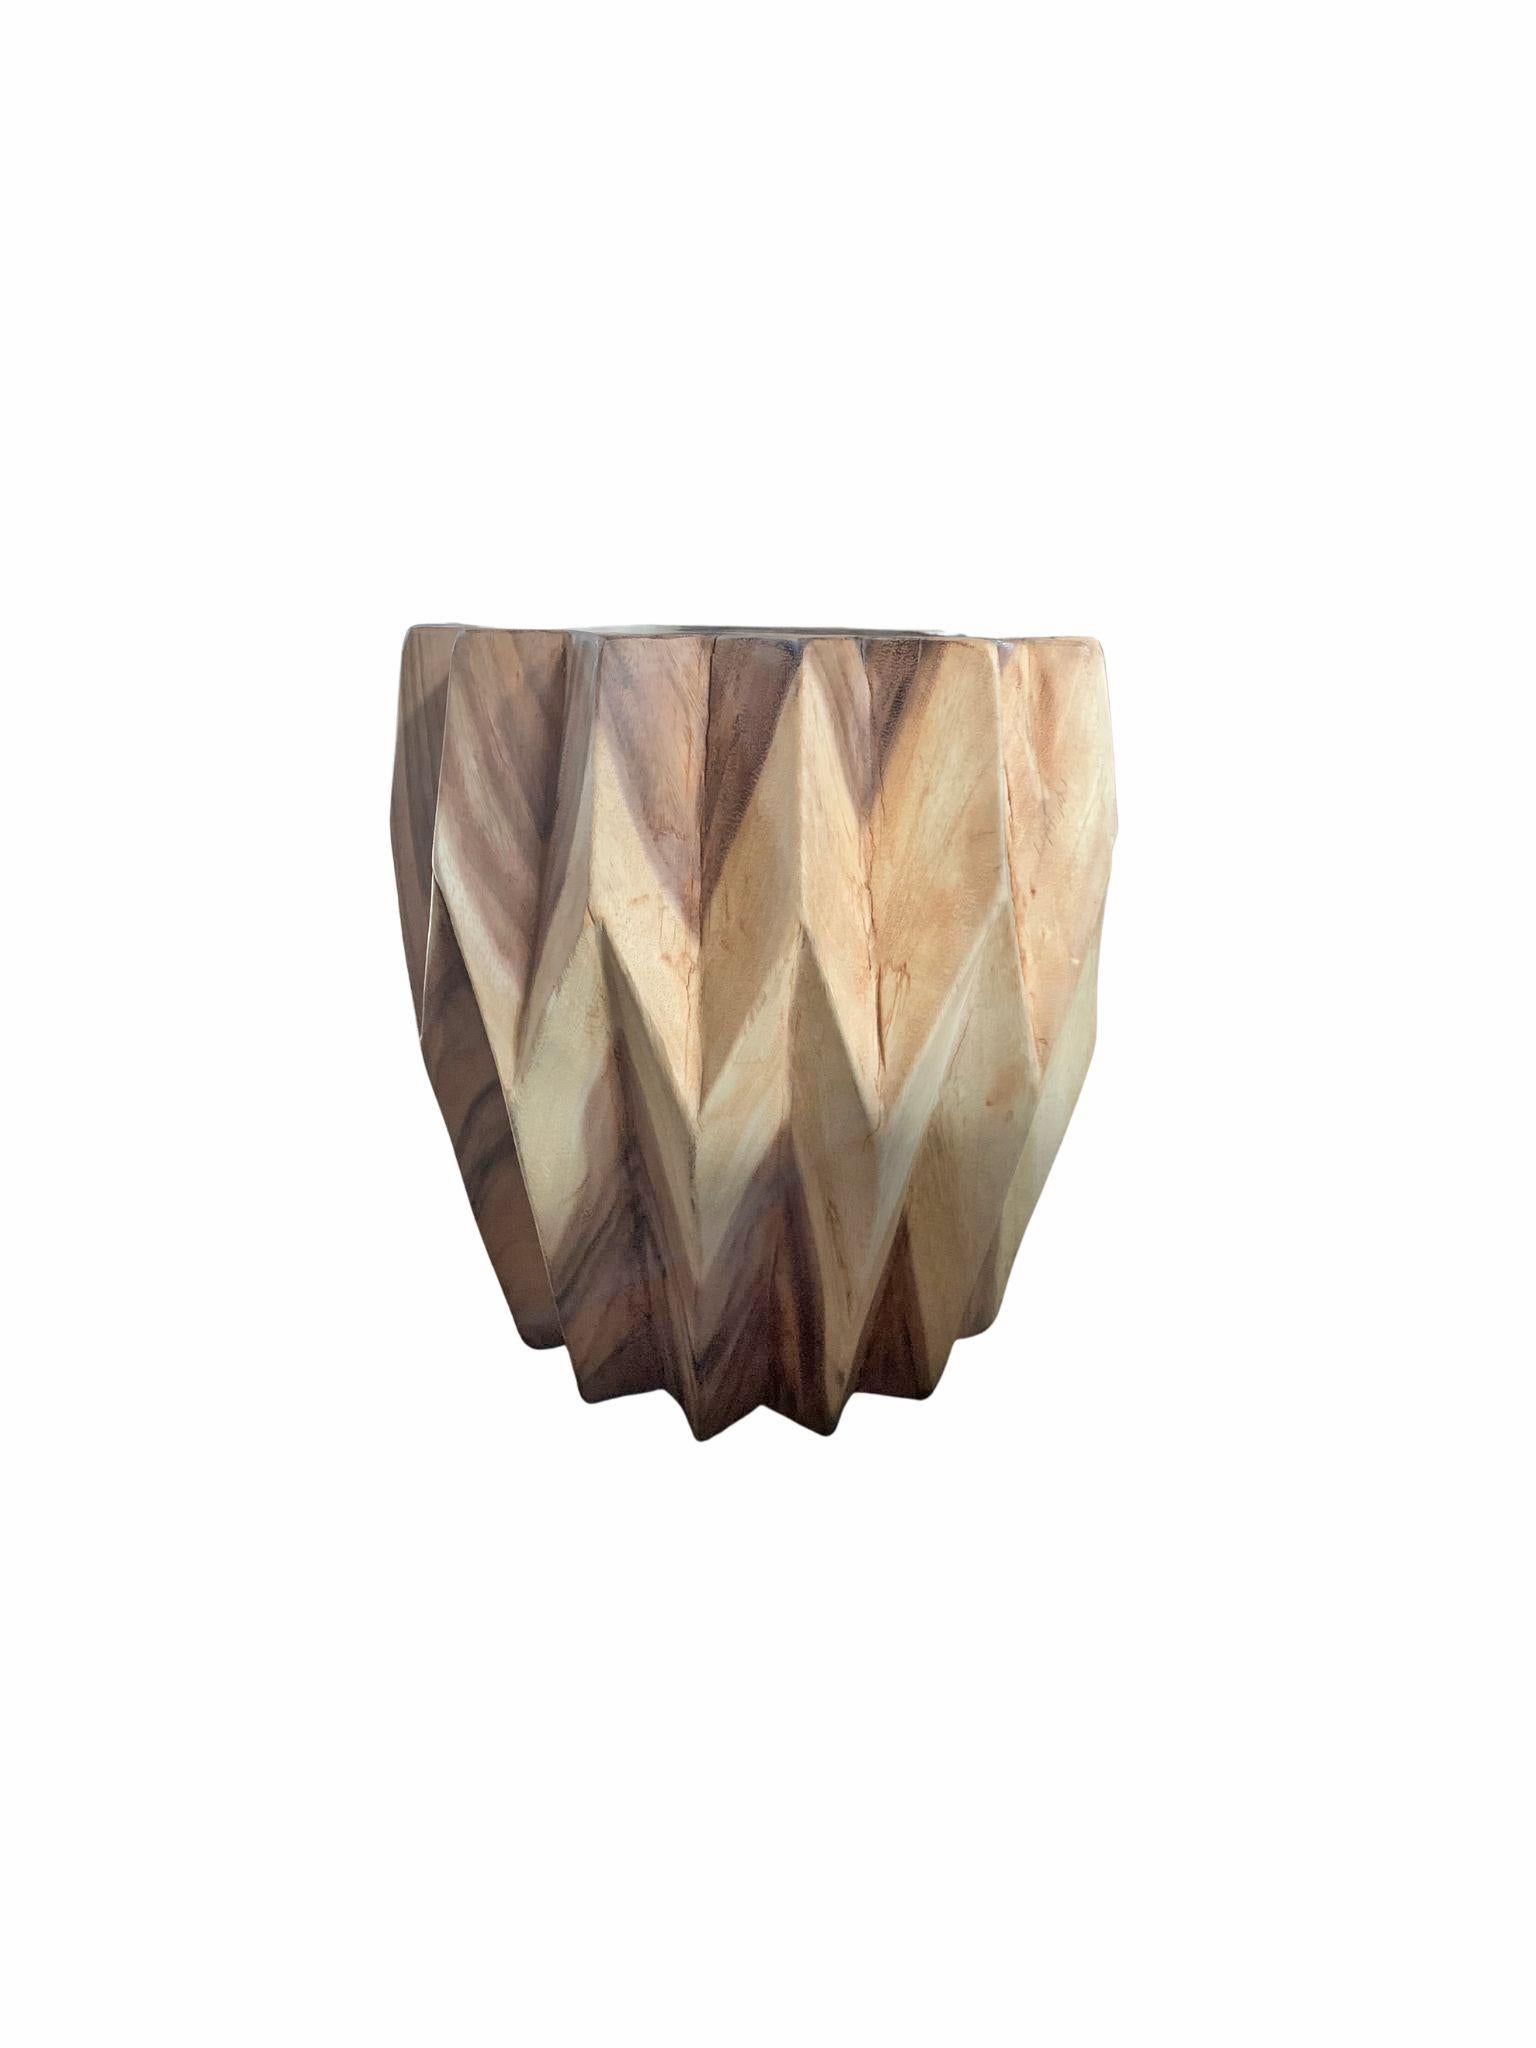 A wonderfully sculptural round side table. Its neutral pigment and subtle wood texture makes it perfect for any space. A uniquely sculptural and versatile piece. This table was crafted from mango wood and was crafted to resemble a work of origami.